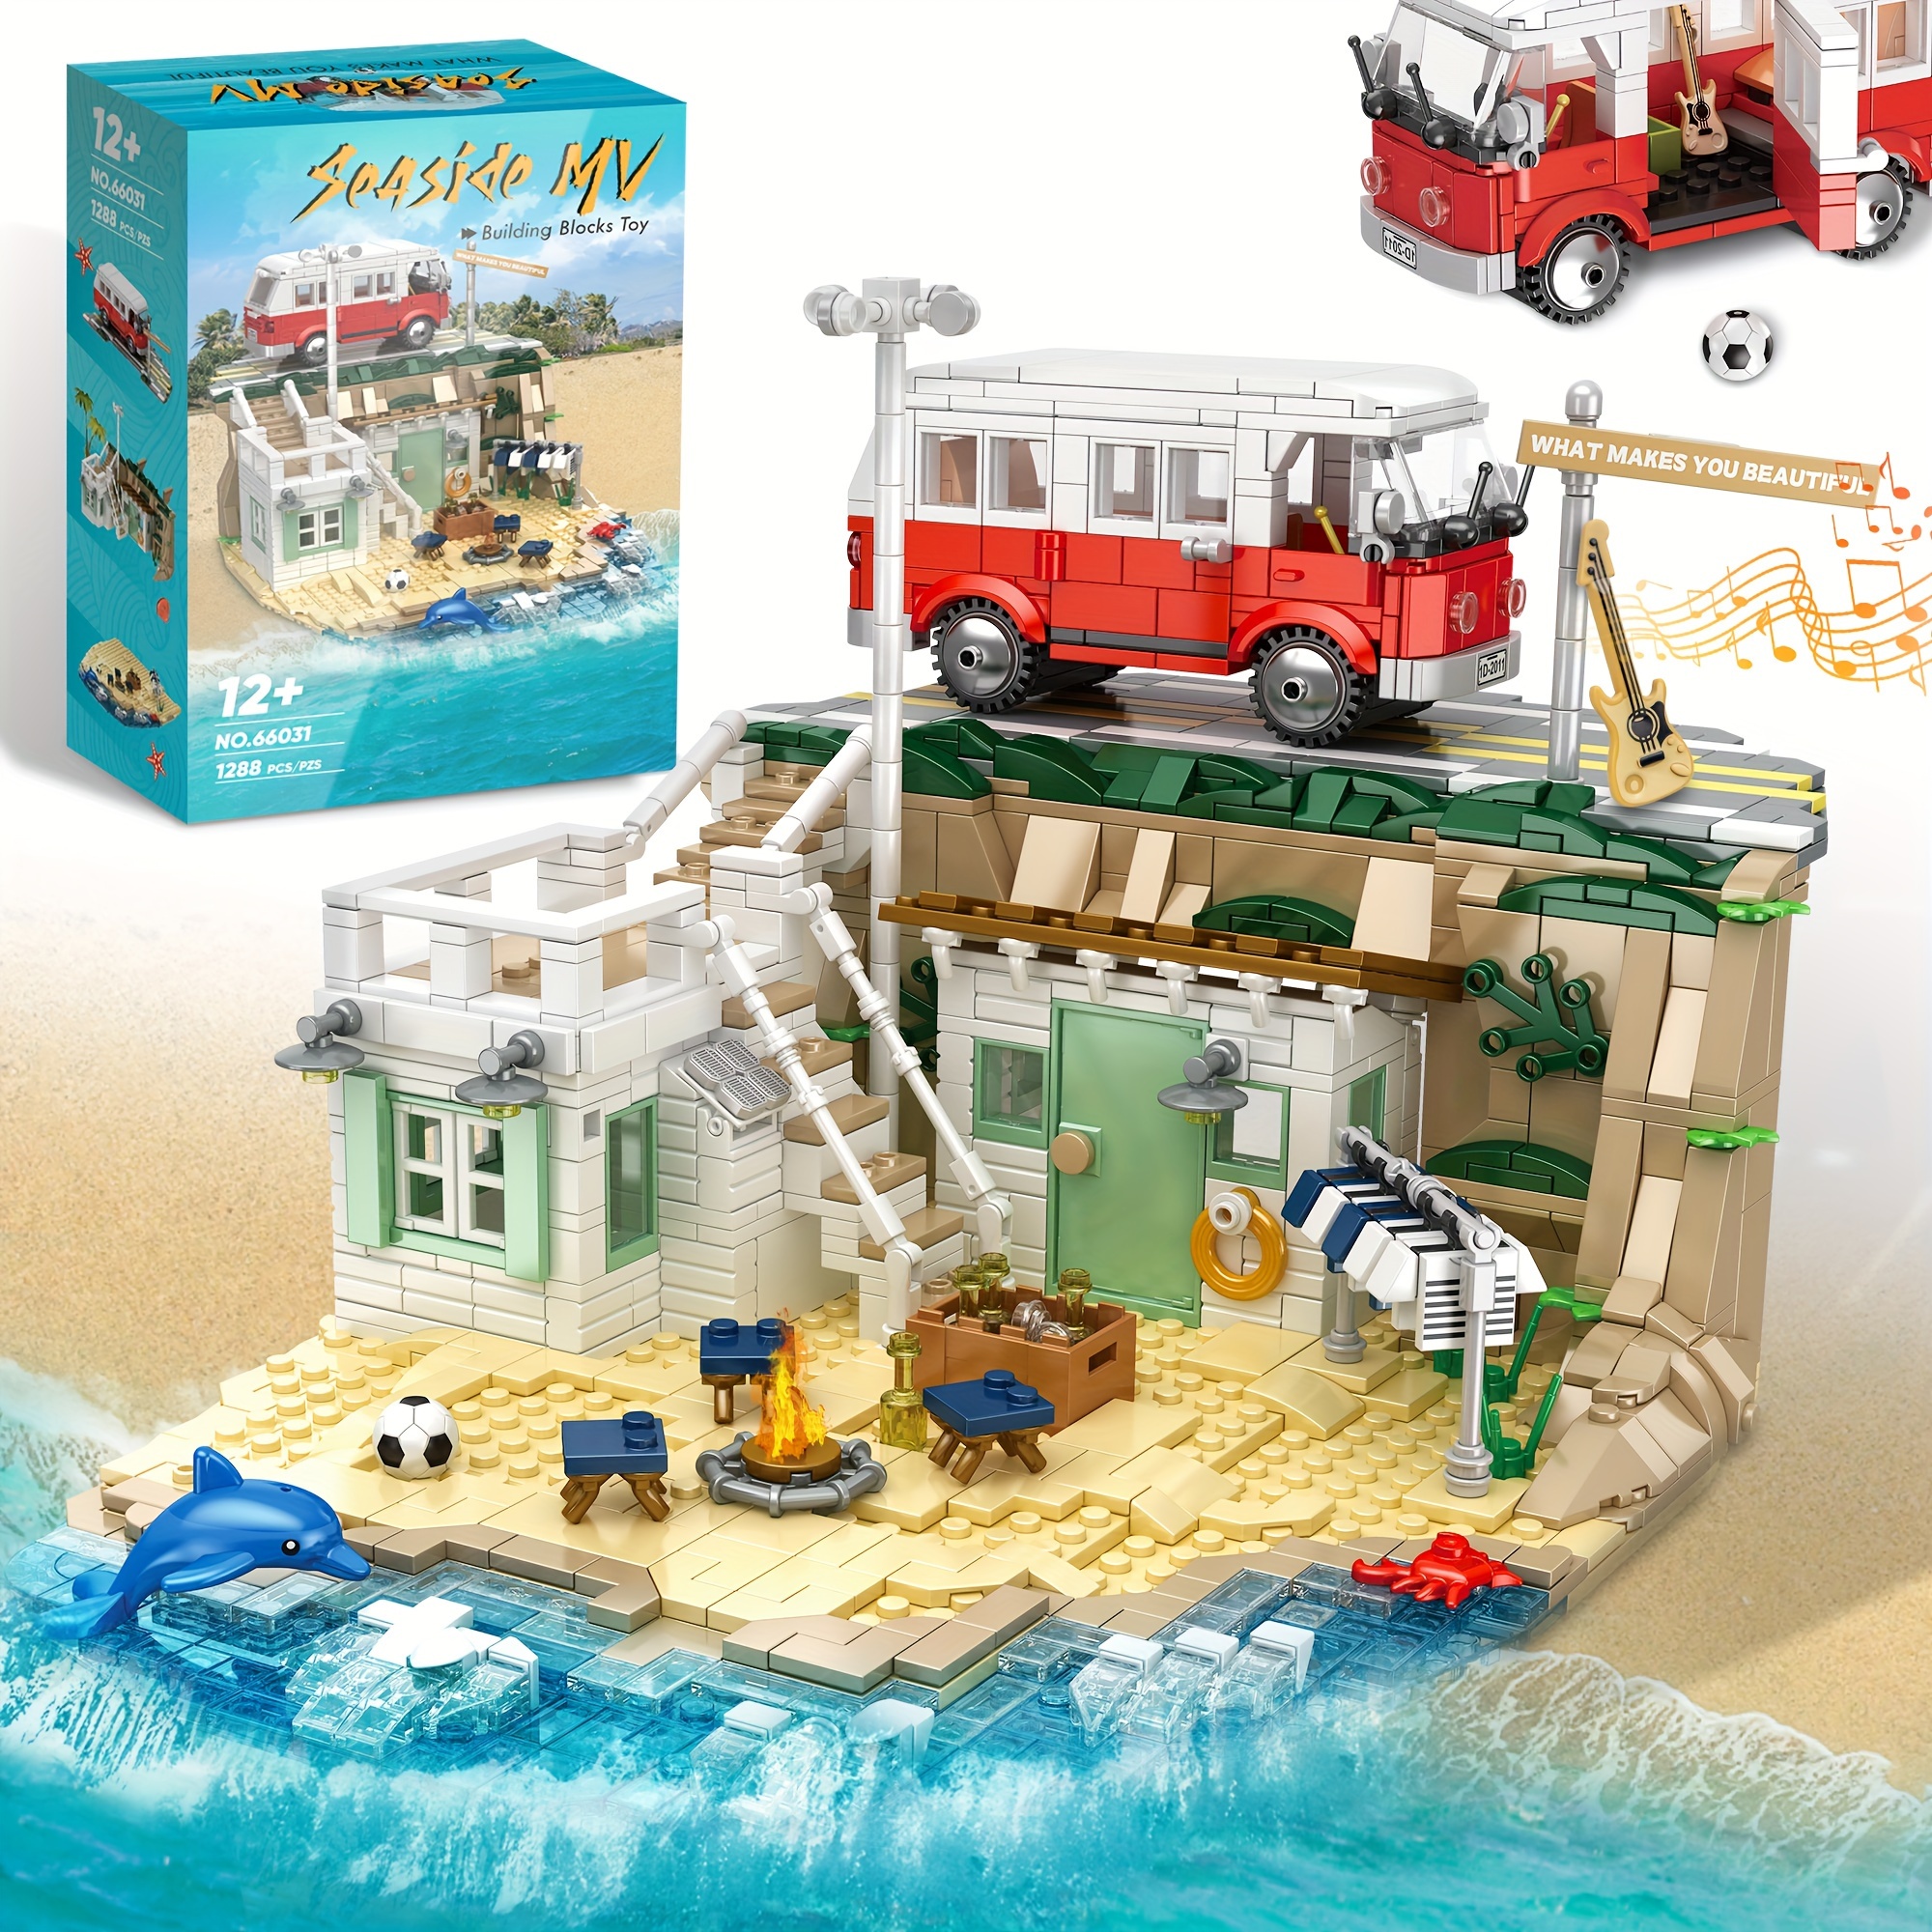 

Friends Beach House, Camping House Building Blocks With Camper Van, 5 , The Central Setting Of The Mv For The Hit Single, 1288 Pcs.